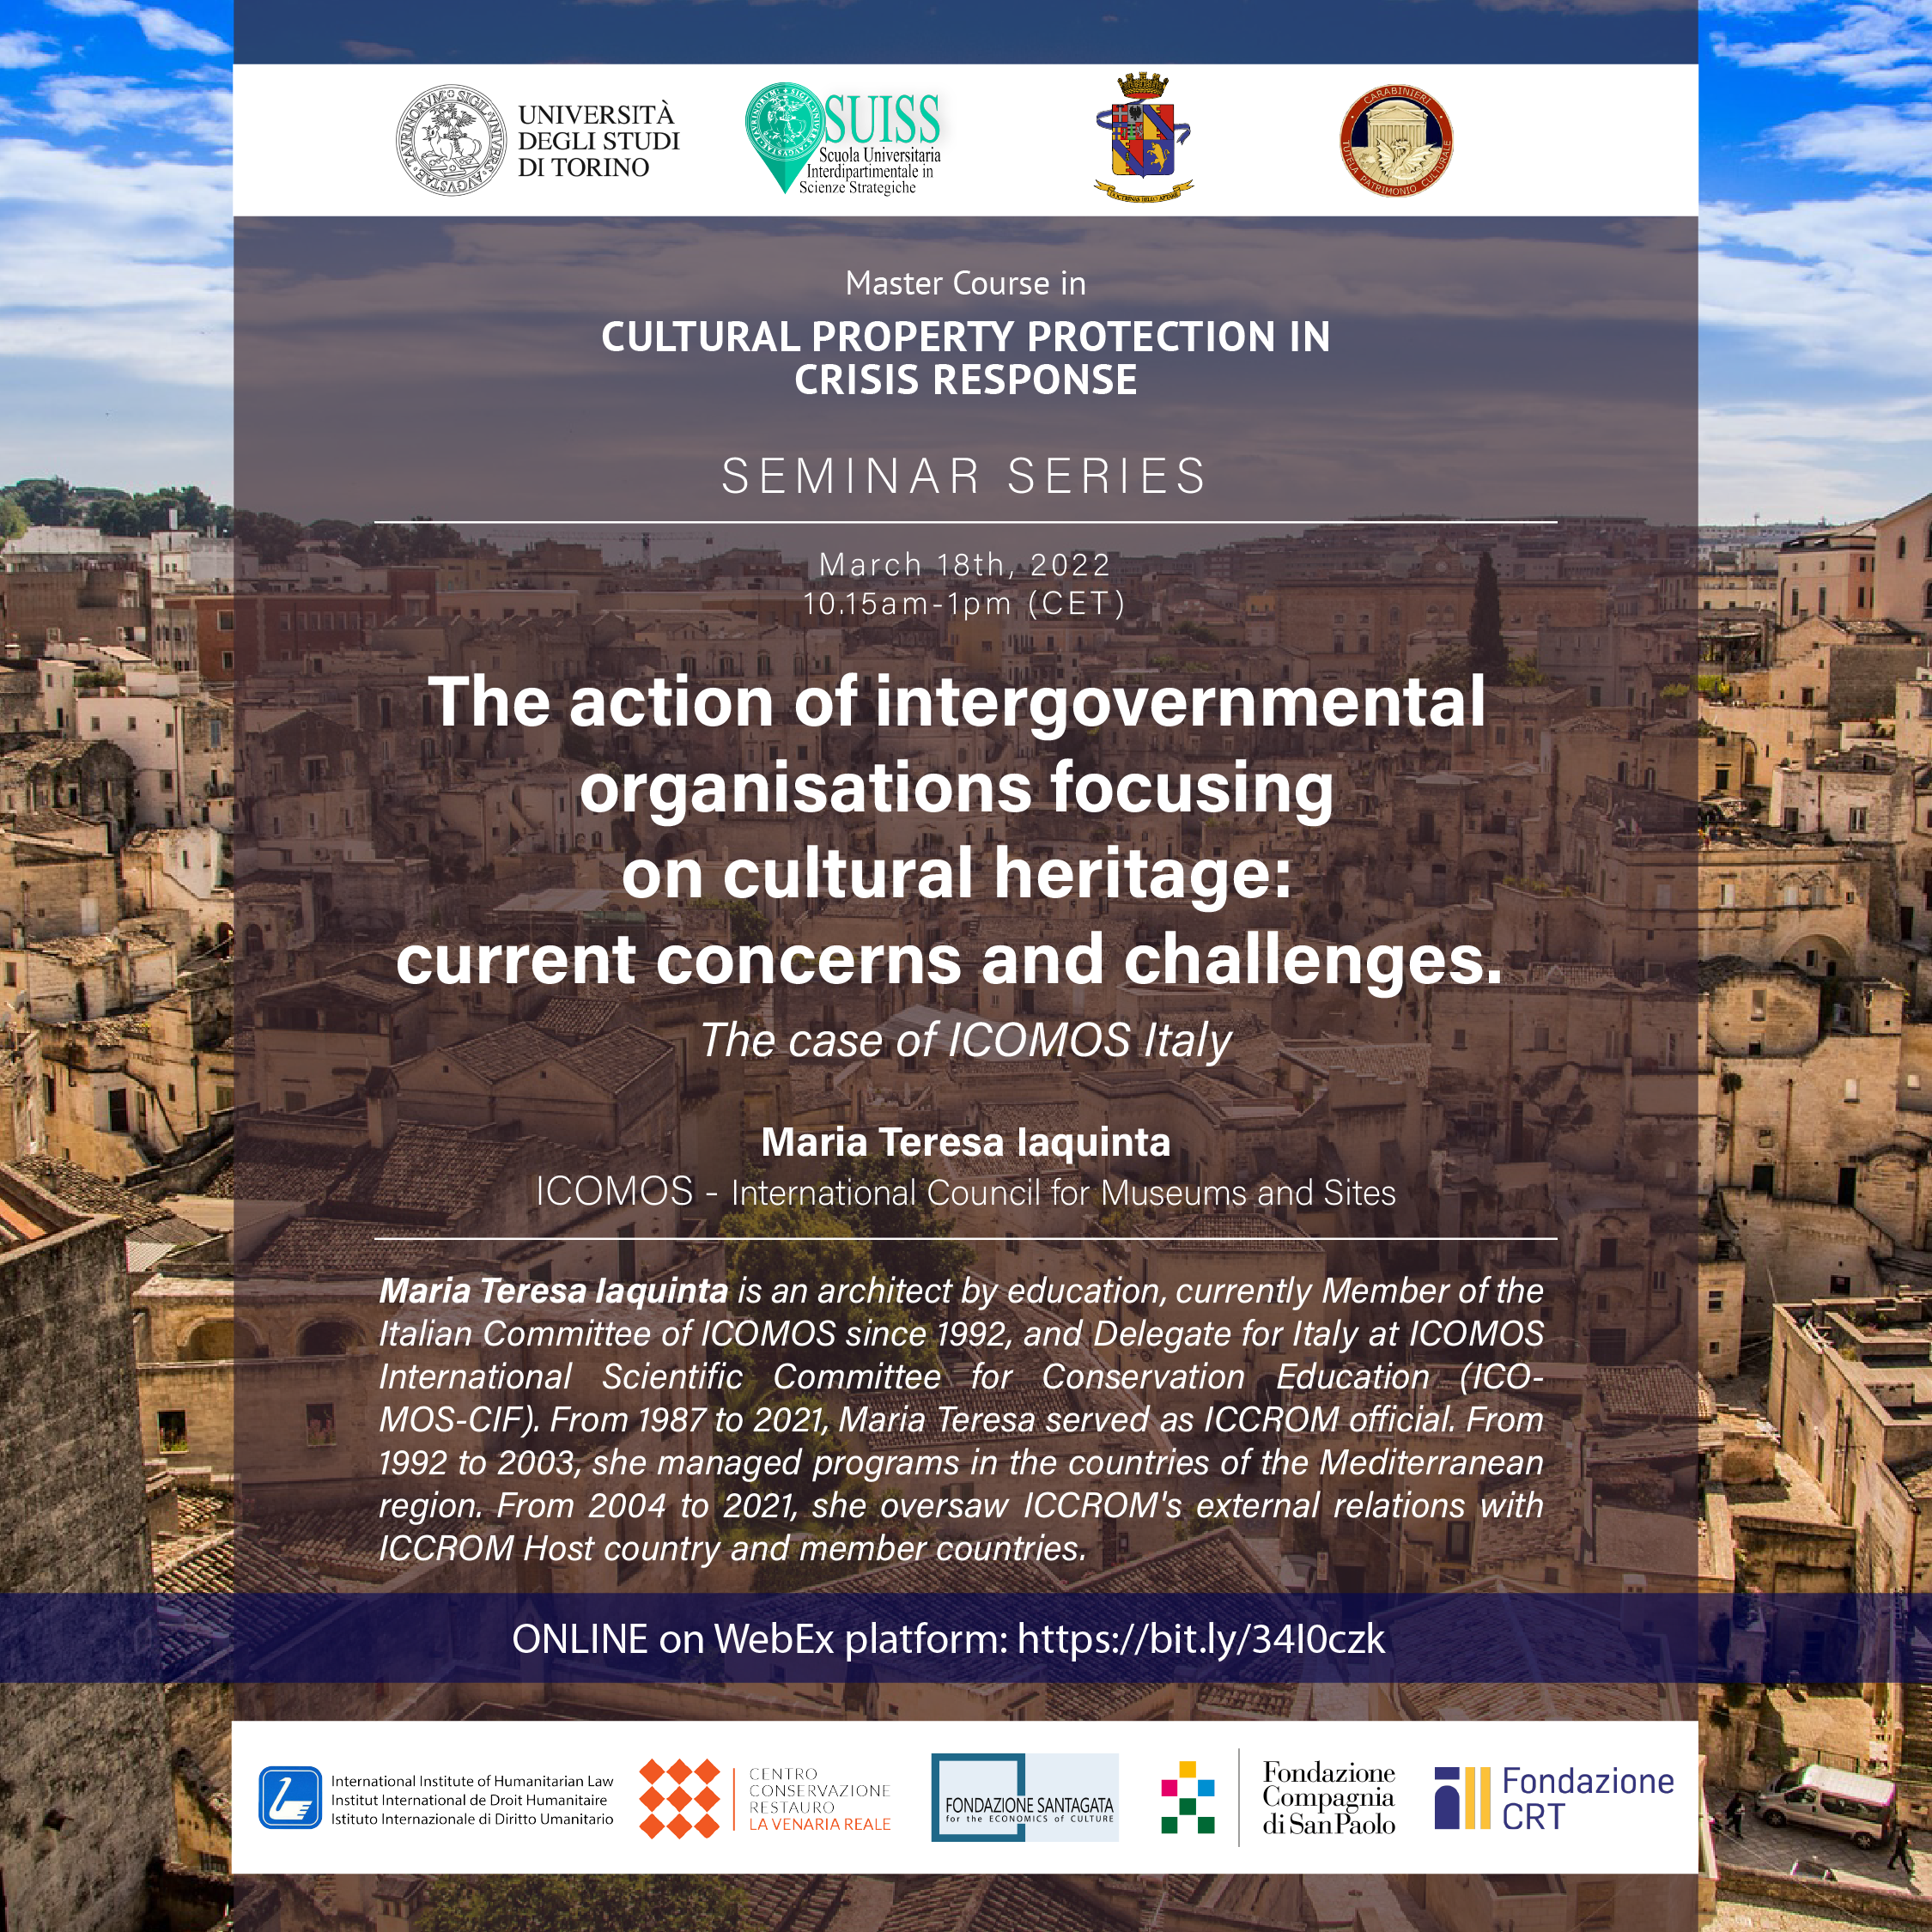 The actions of Intergovernmental organizations focusing on cultural heritage: current concerns and challenges - the case of ICOMOS Italy